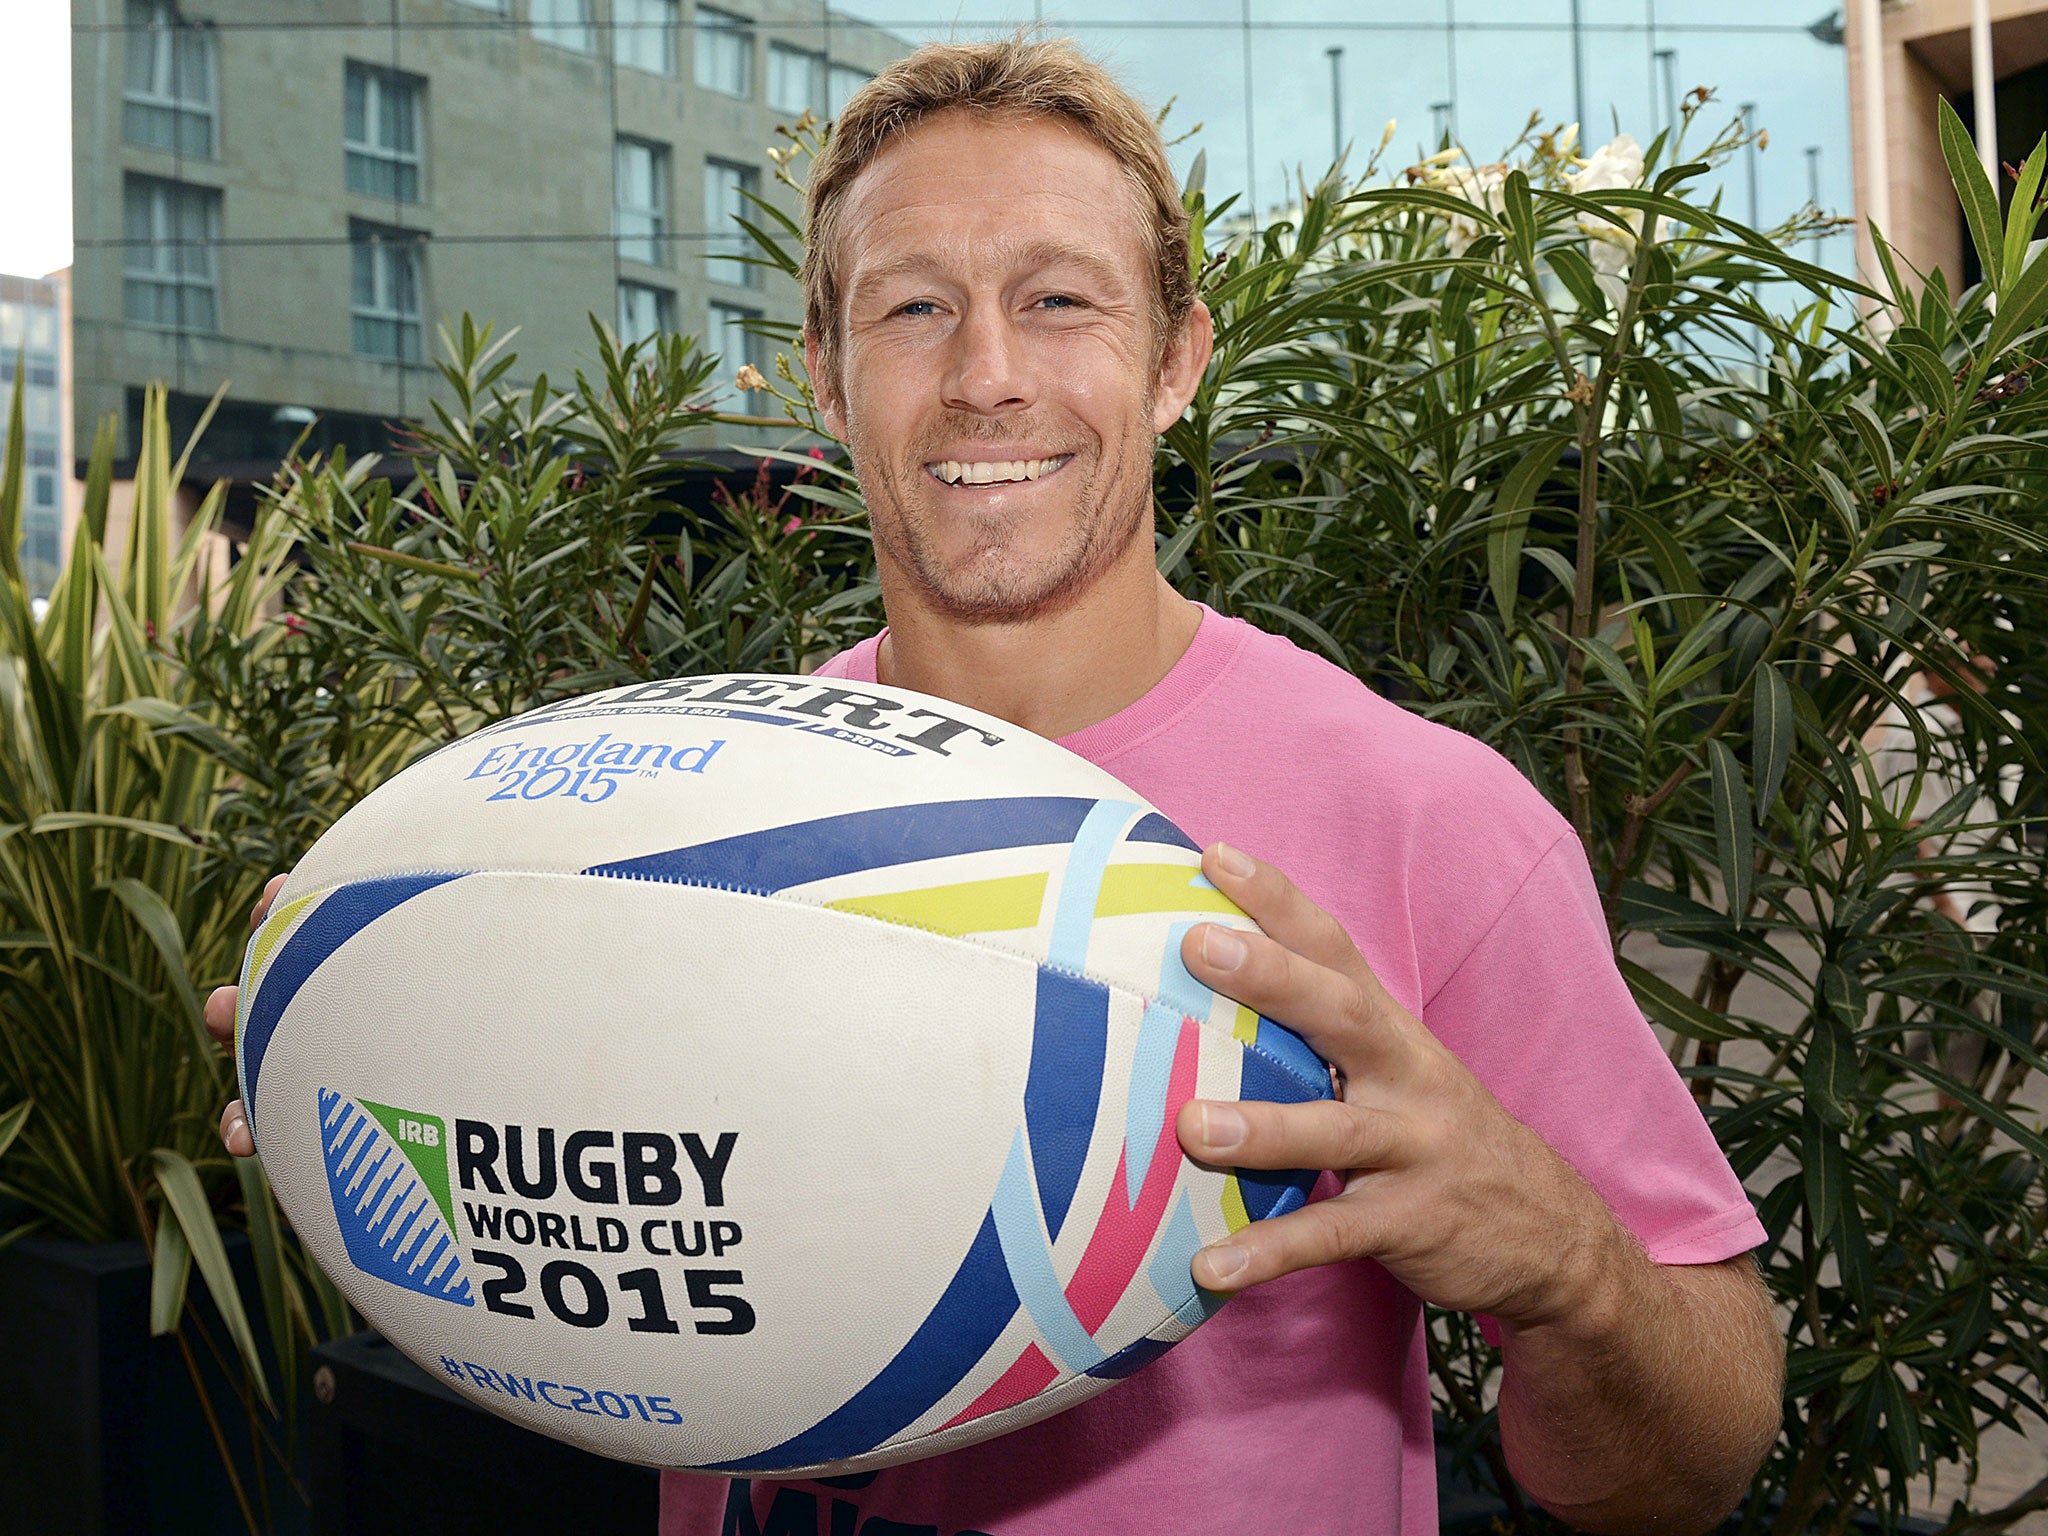 World Cup winner Jonny Wilkinson has helped promote the 2015 Rugby World Cup